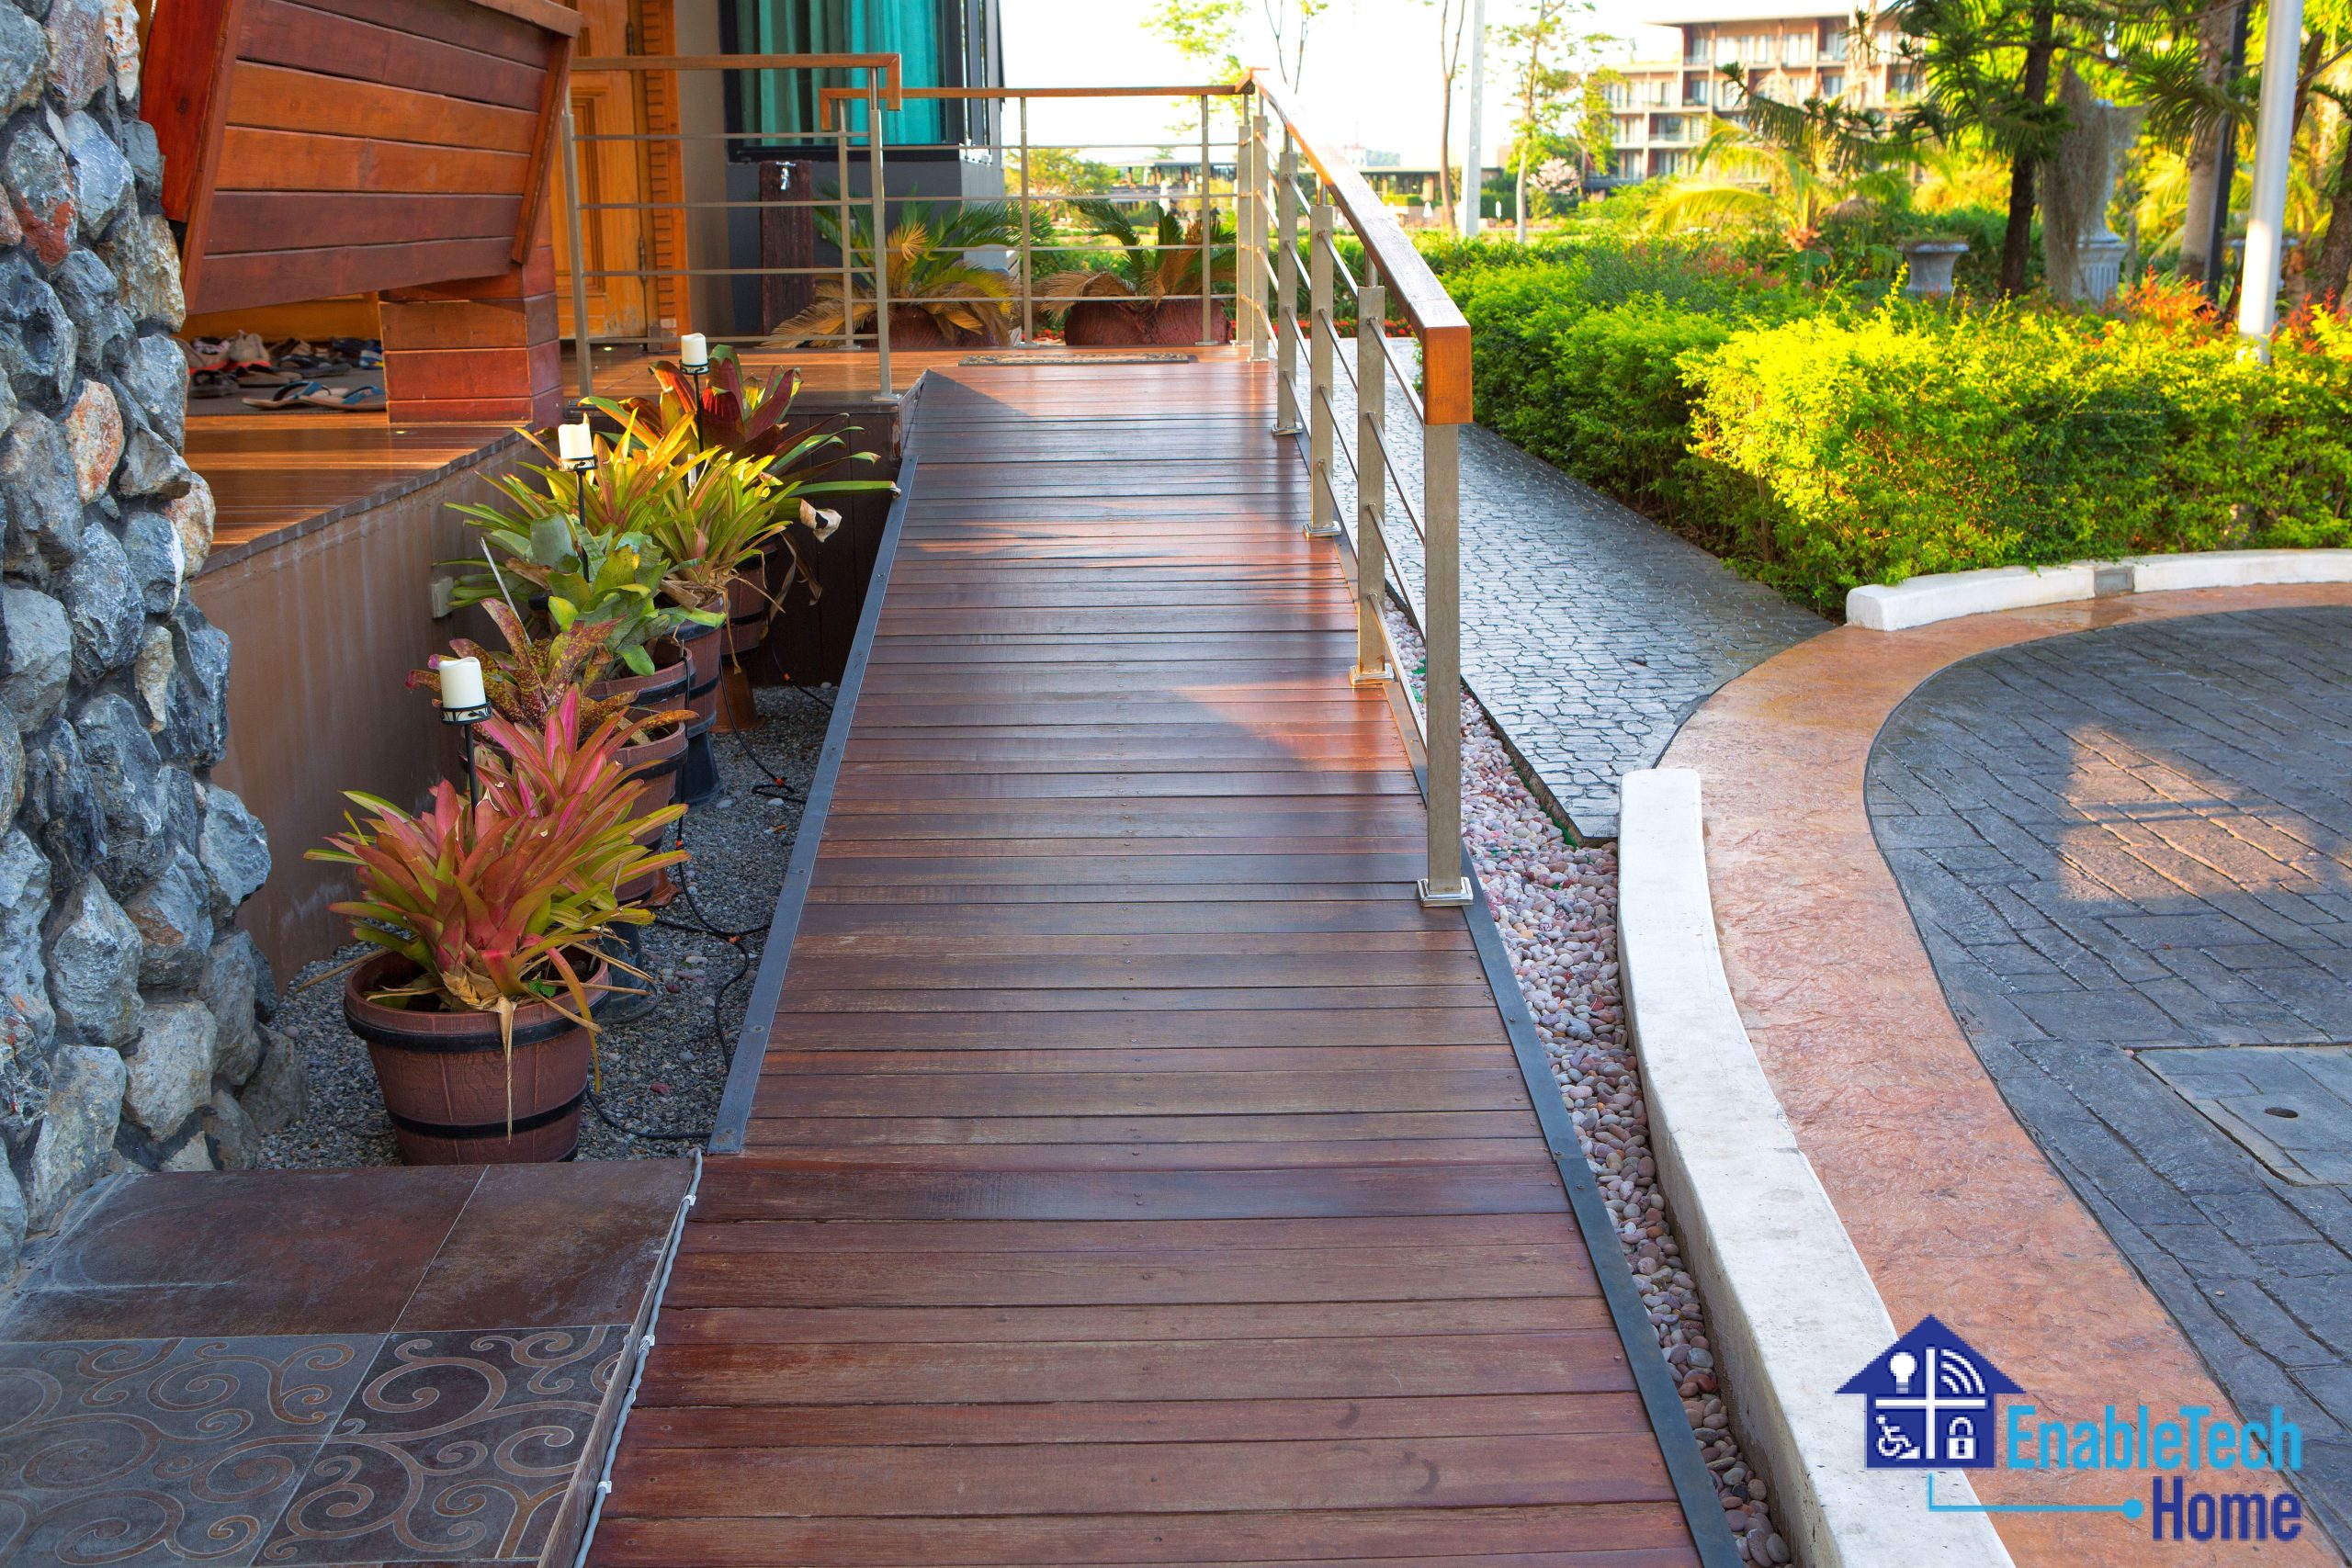 EnableTech Home: The Most Respected for Wheelchair & Ramp Construction in Lake Stevens